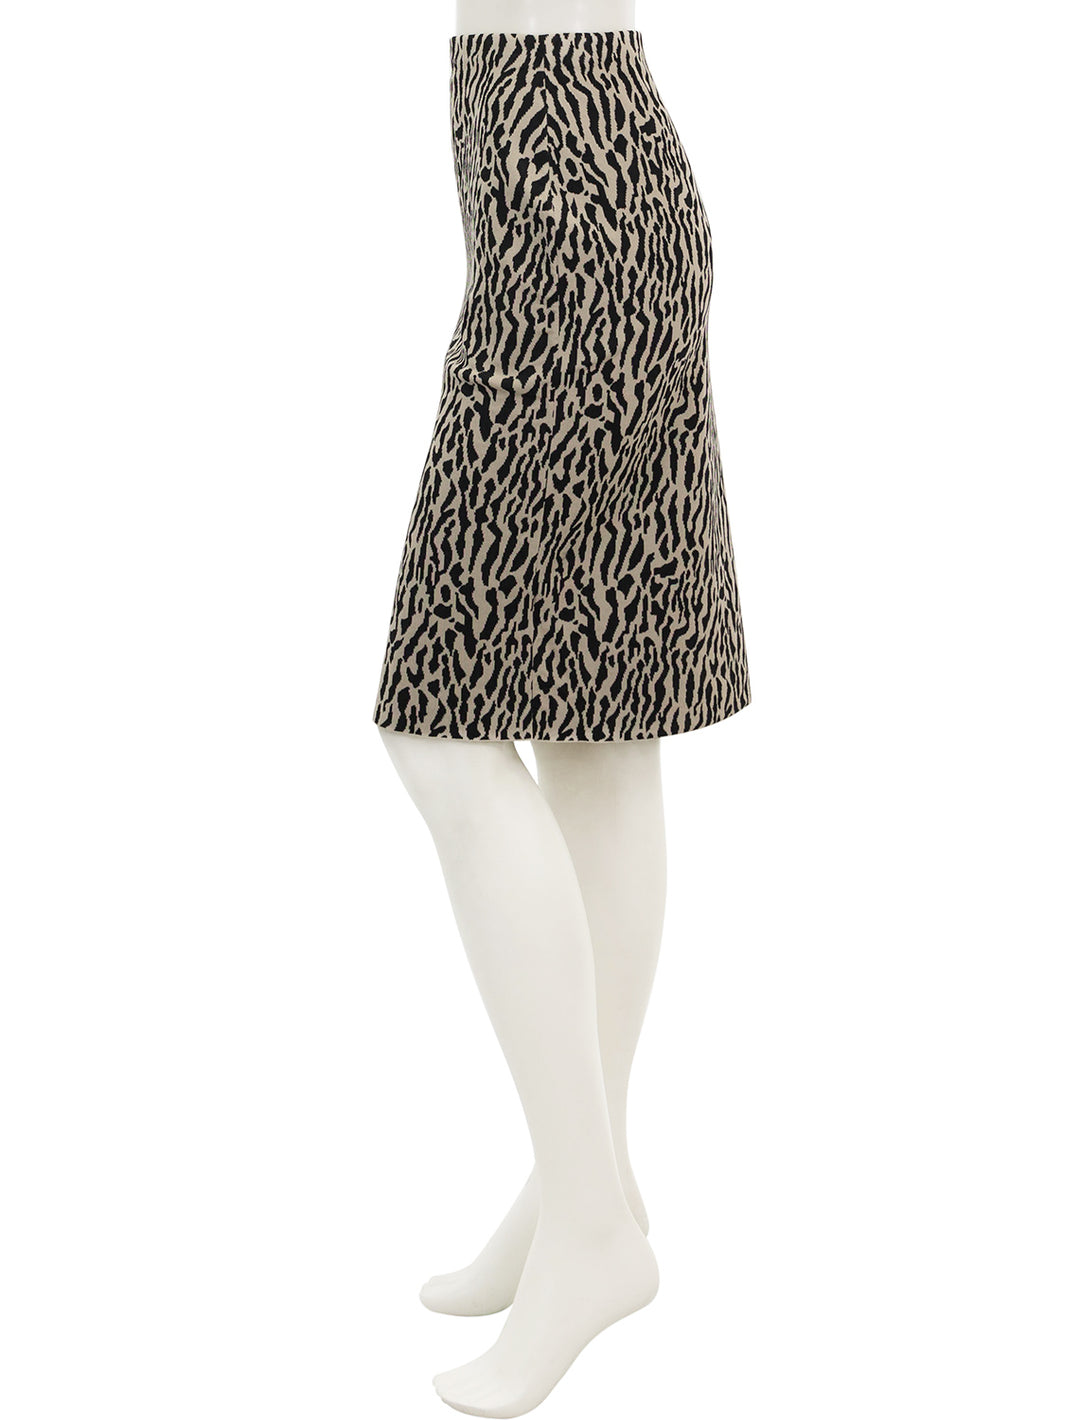 Side view of Theory's pencil skirt in bristol animal intarsia print.